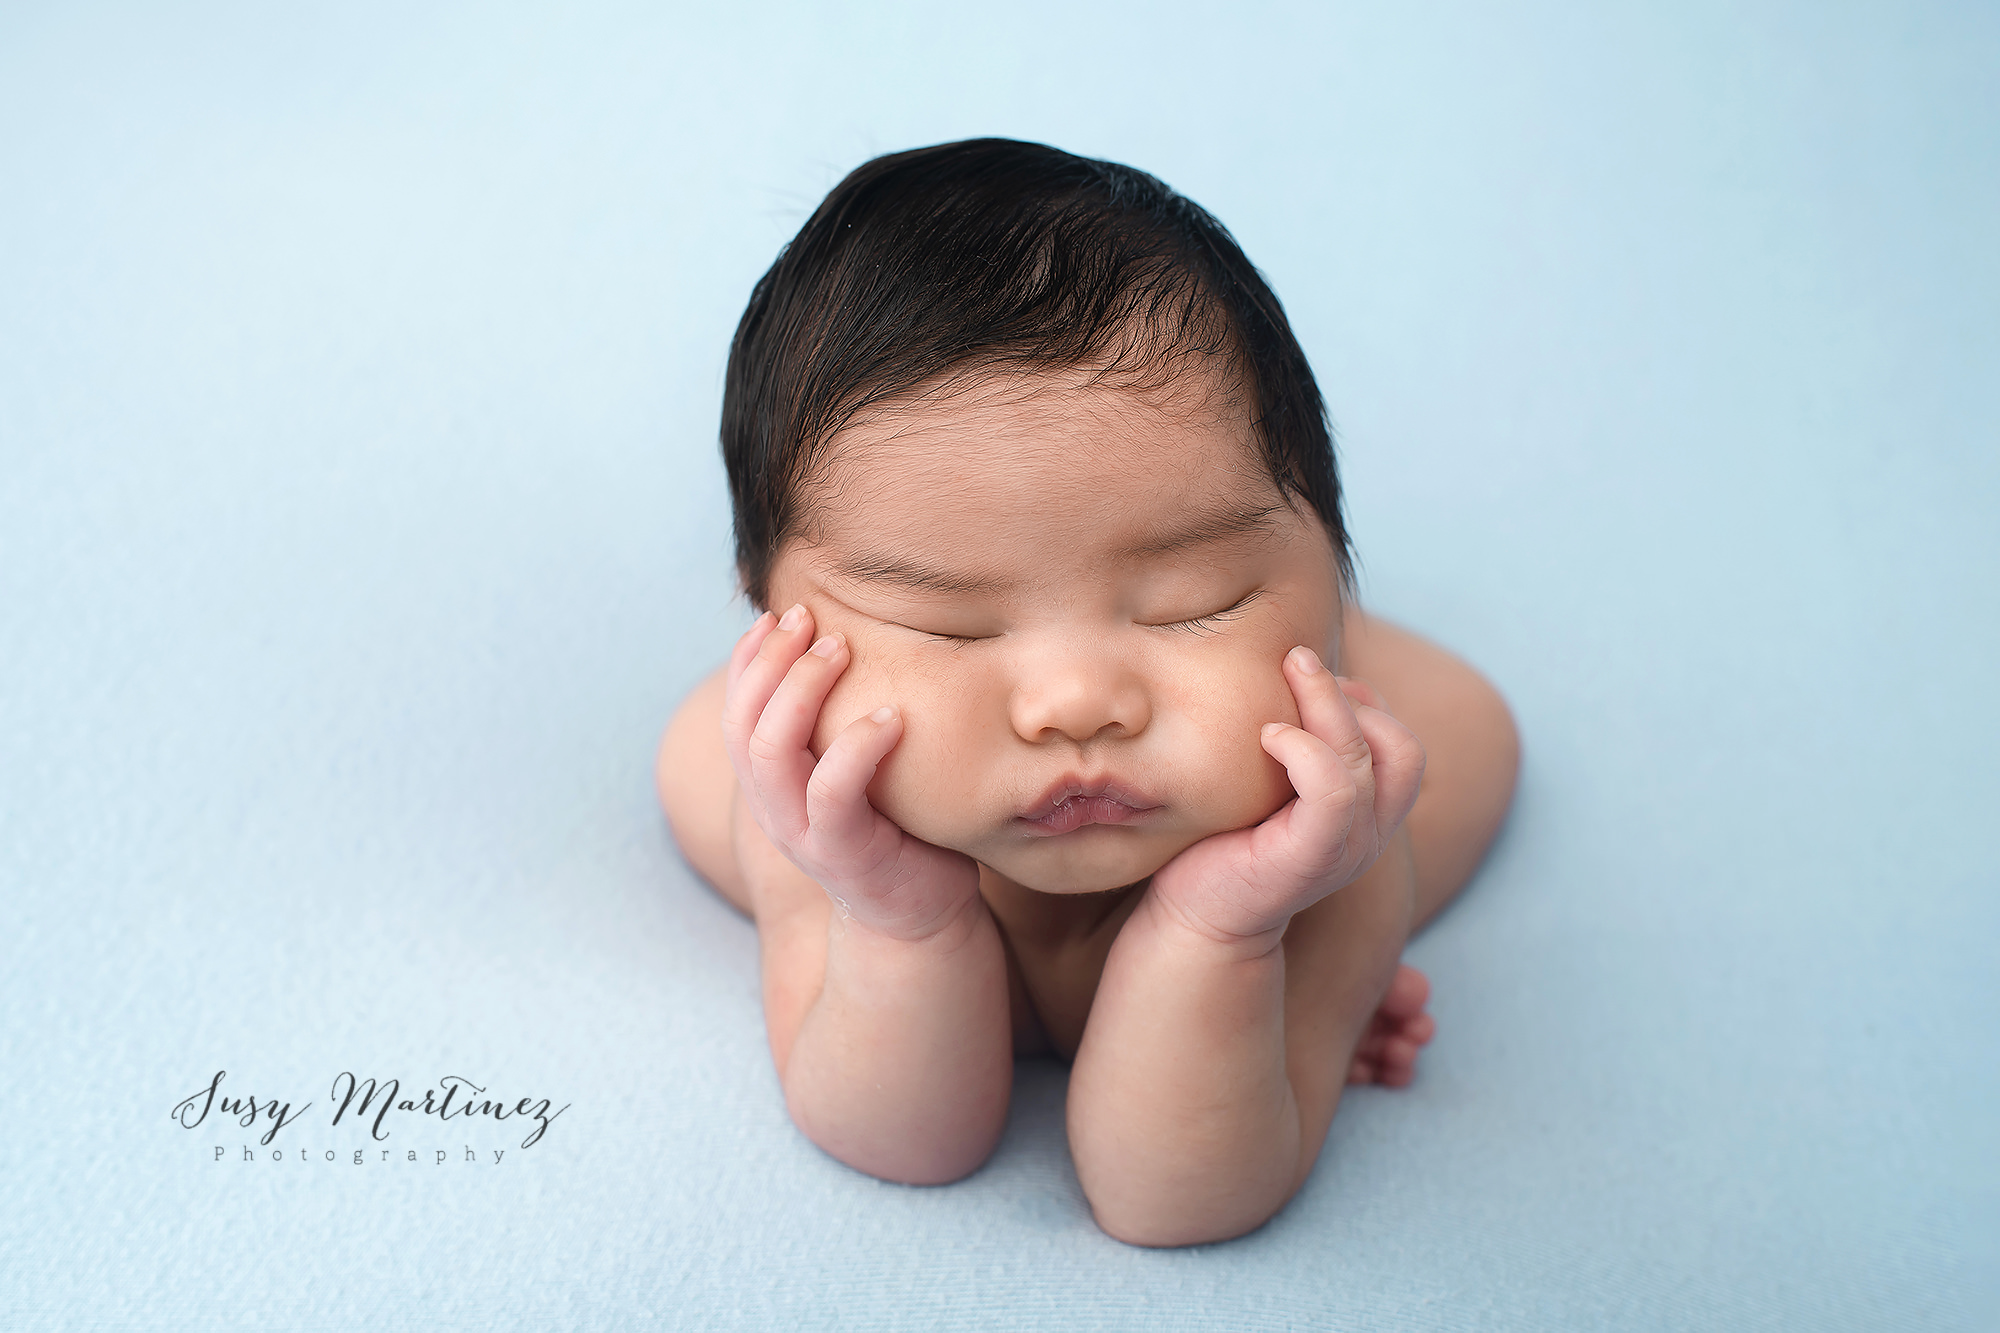 baby in froggy pose photographed by Susy Martinez Photography